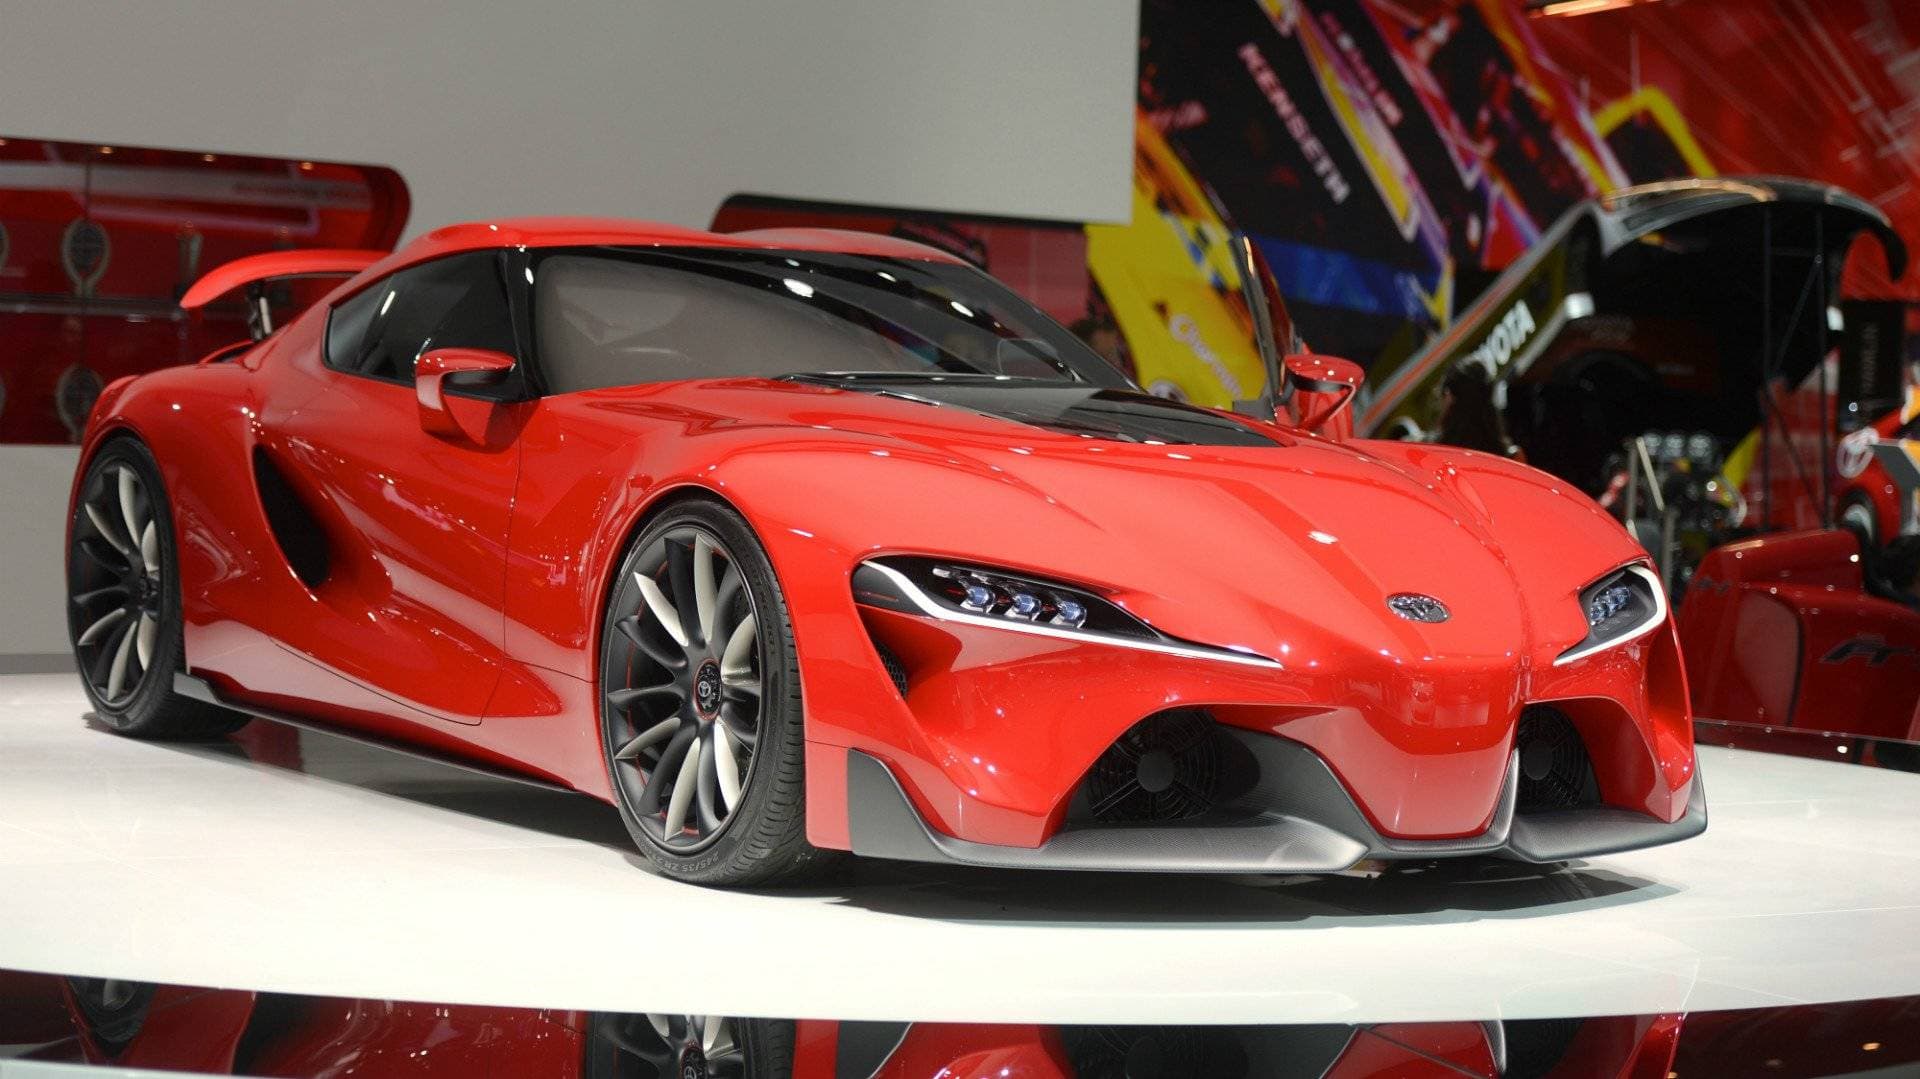 According to Reports, the Upcoming Toyota Supra Will Have a Manual Transmission